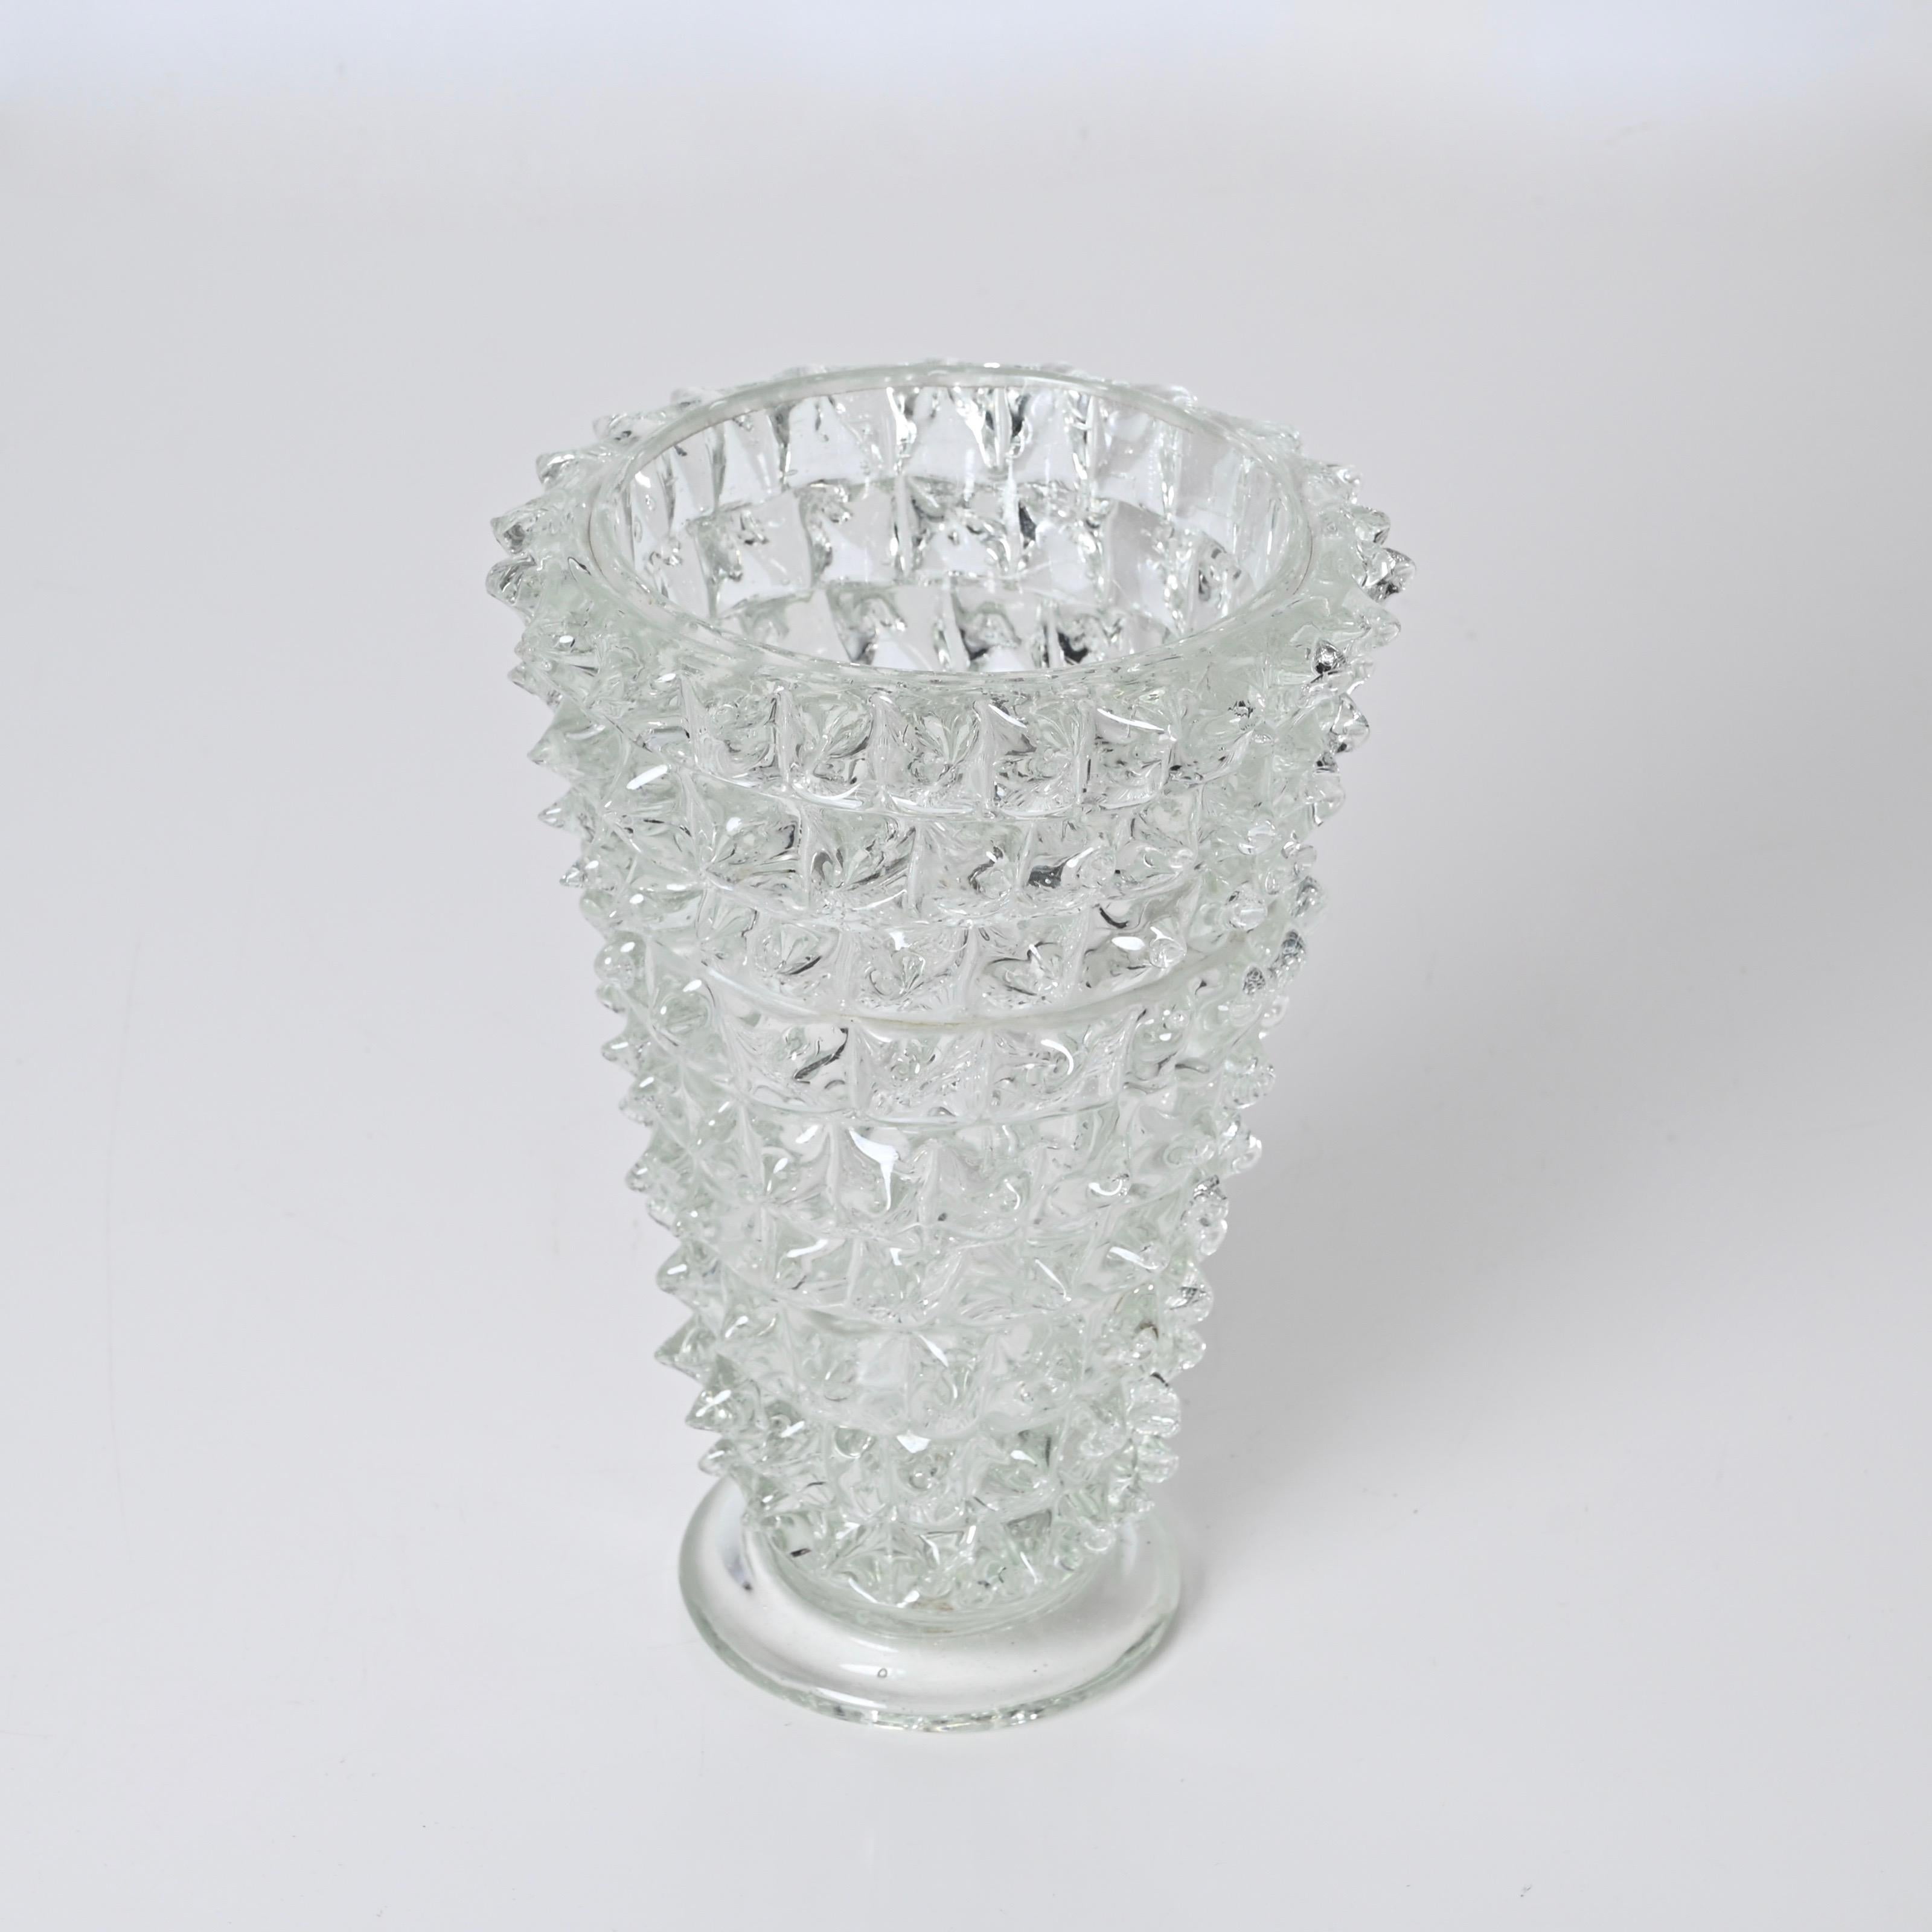 Rostrato Murano Glass Vase by Ercole Barovier for Barovier & Toso, Italy 1940s 9